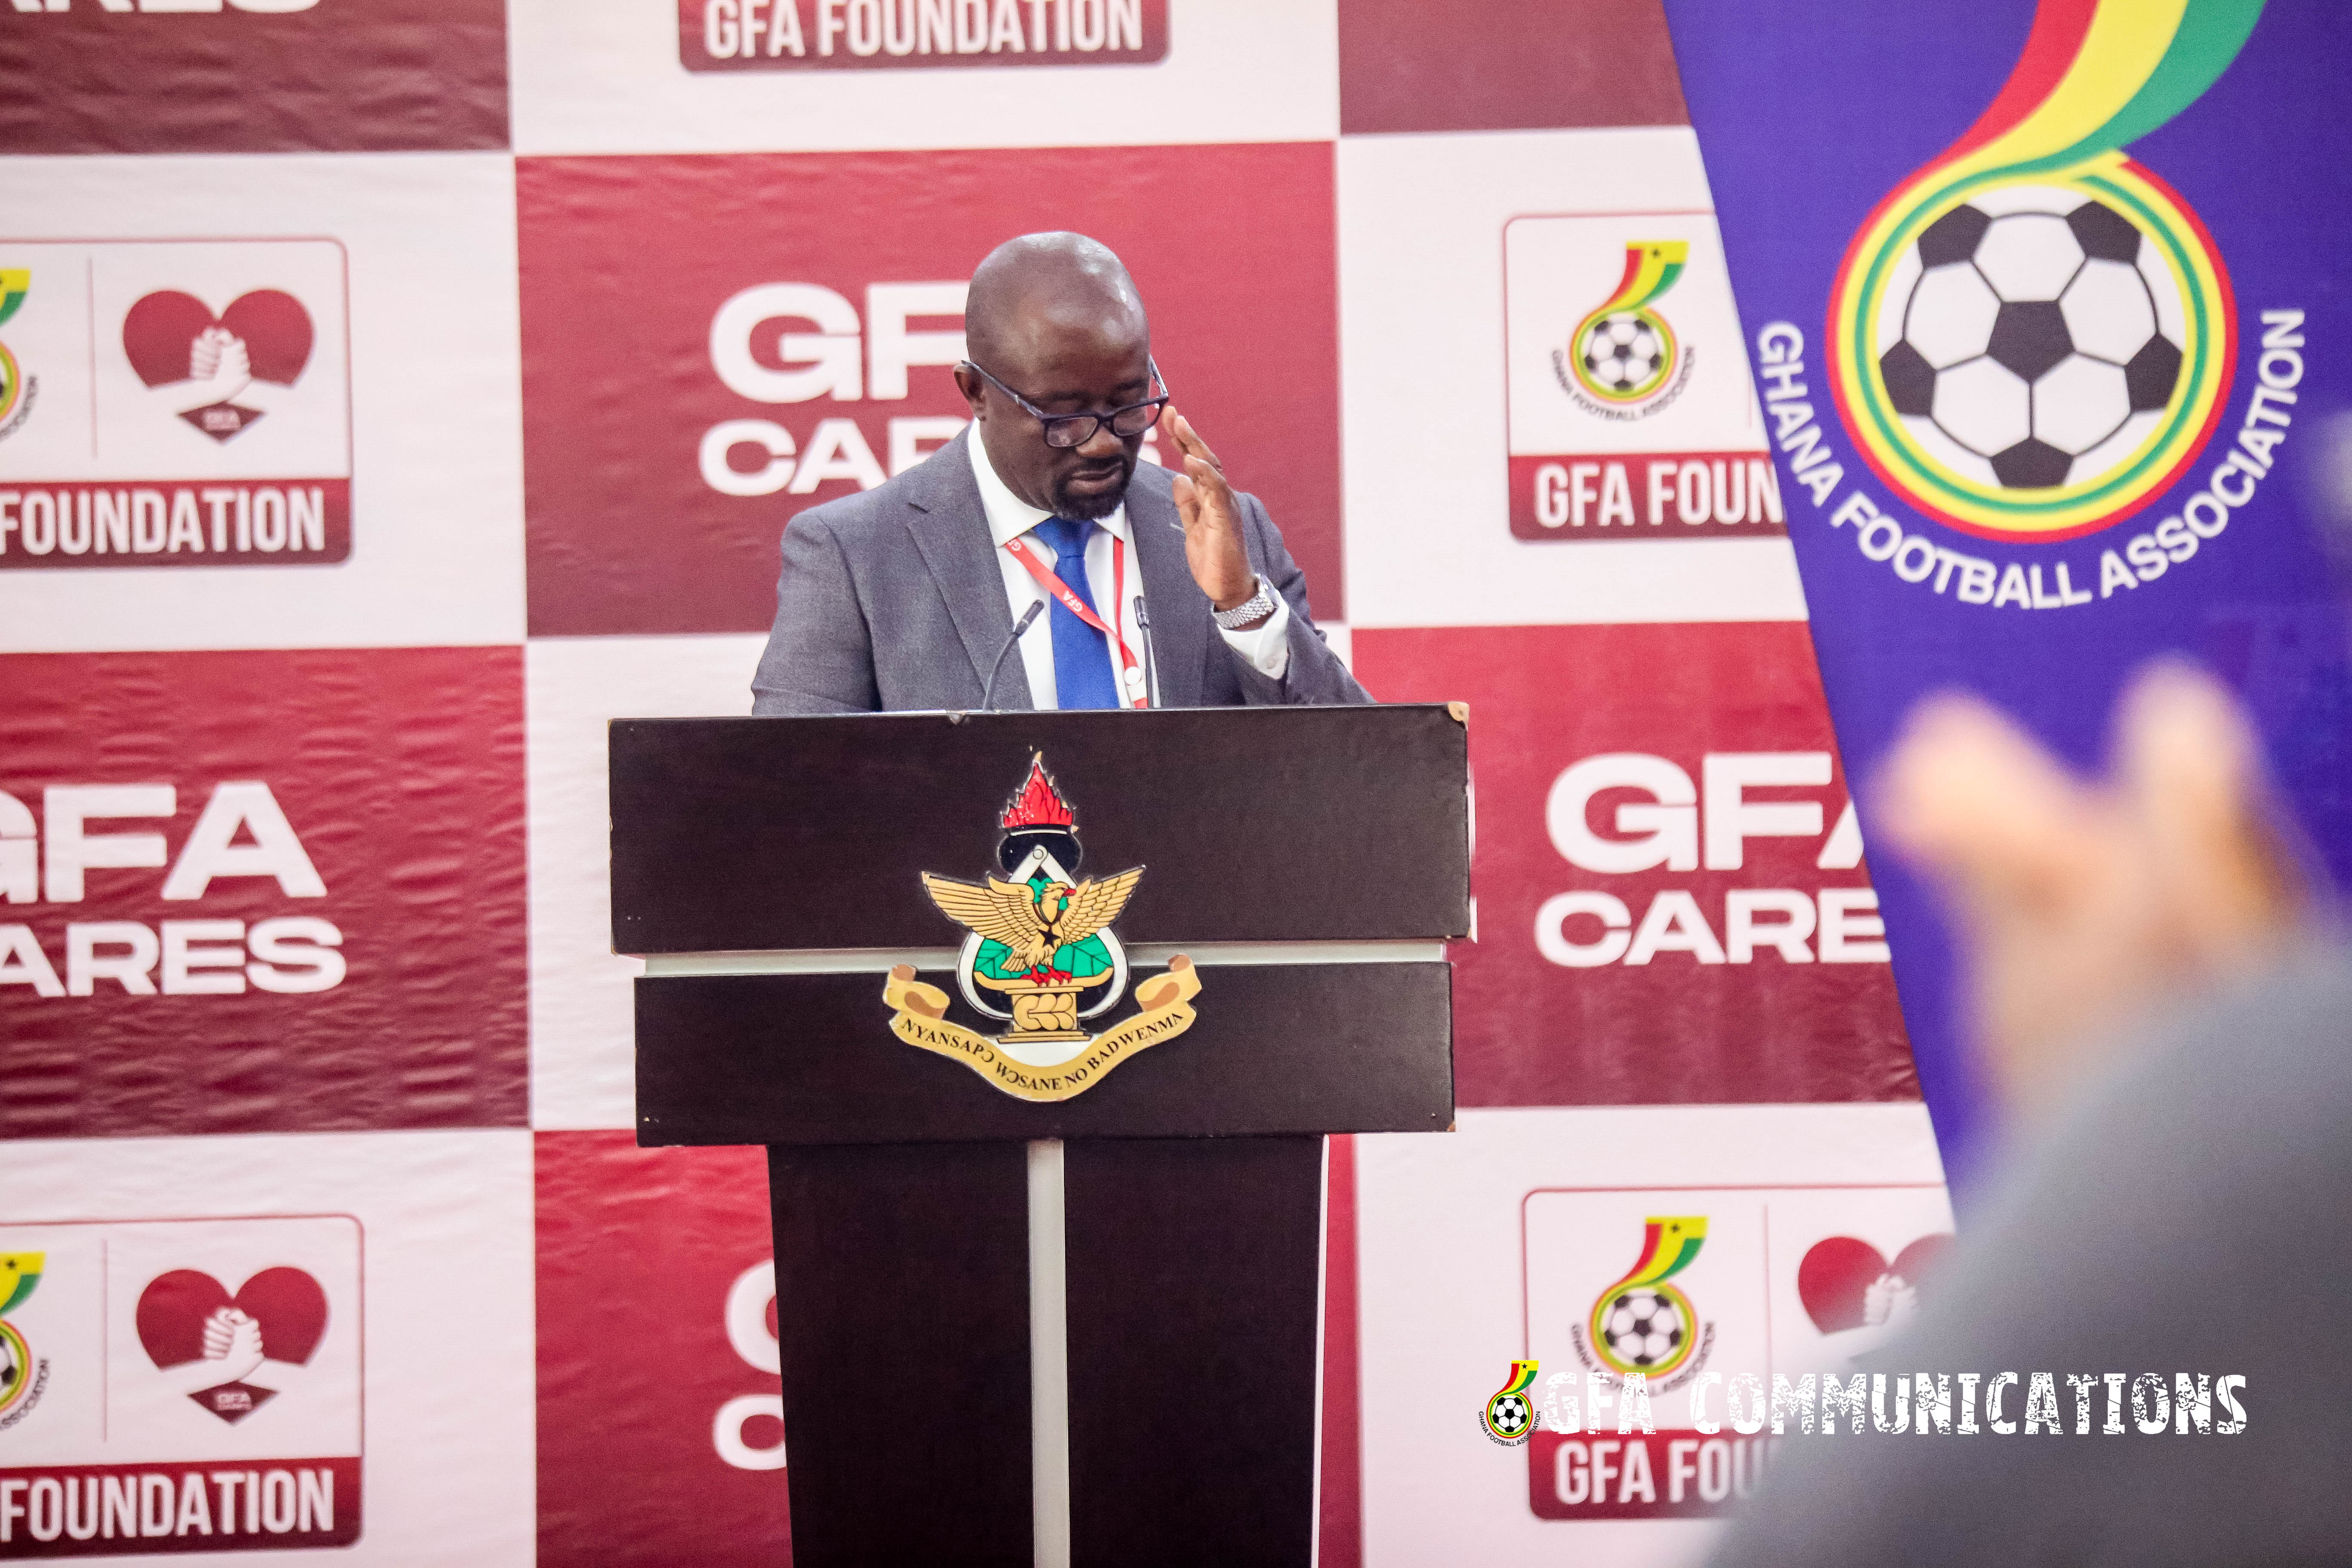 Boost for Regional Leagues as GFA announce 300,000 Referee support